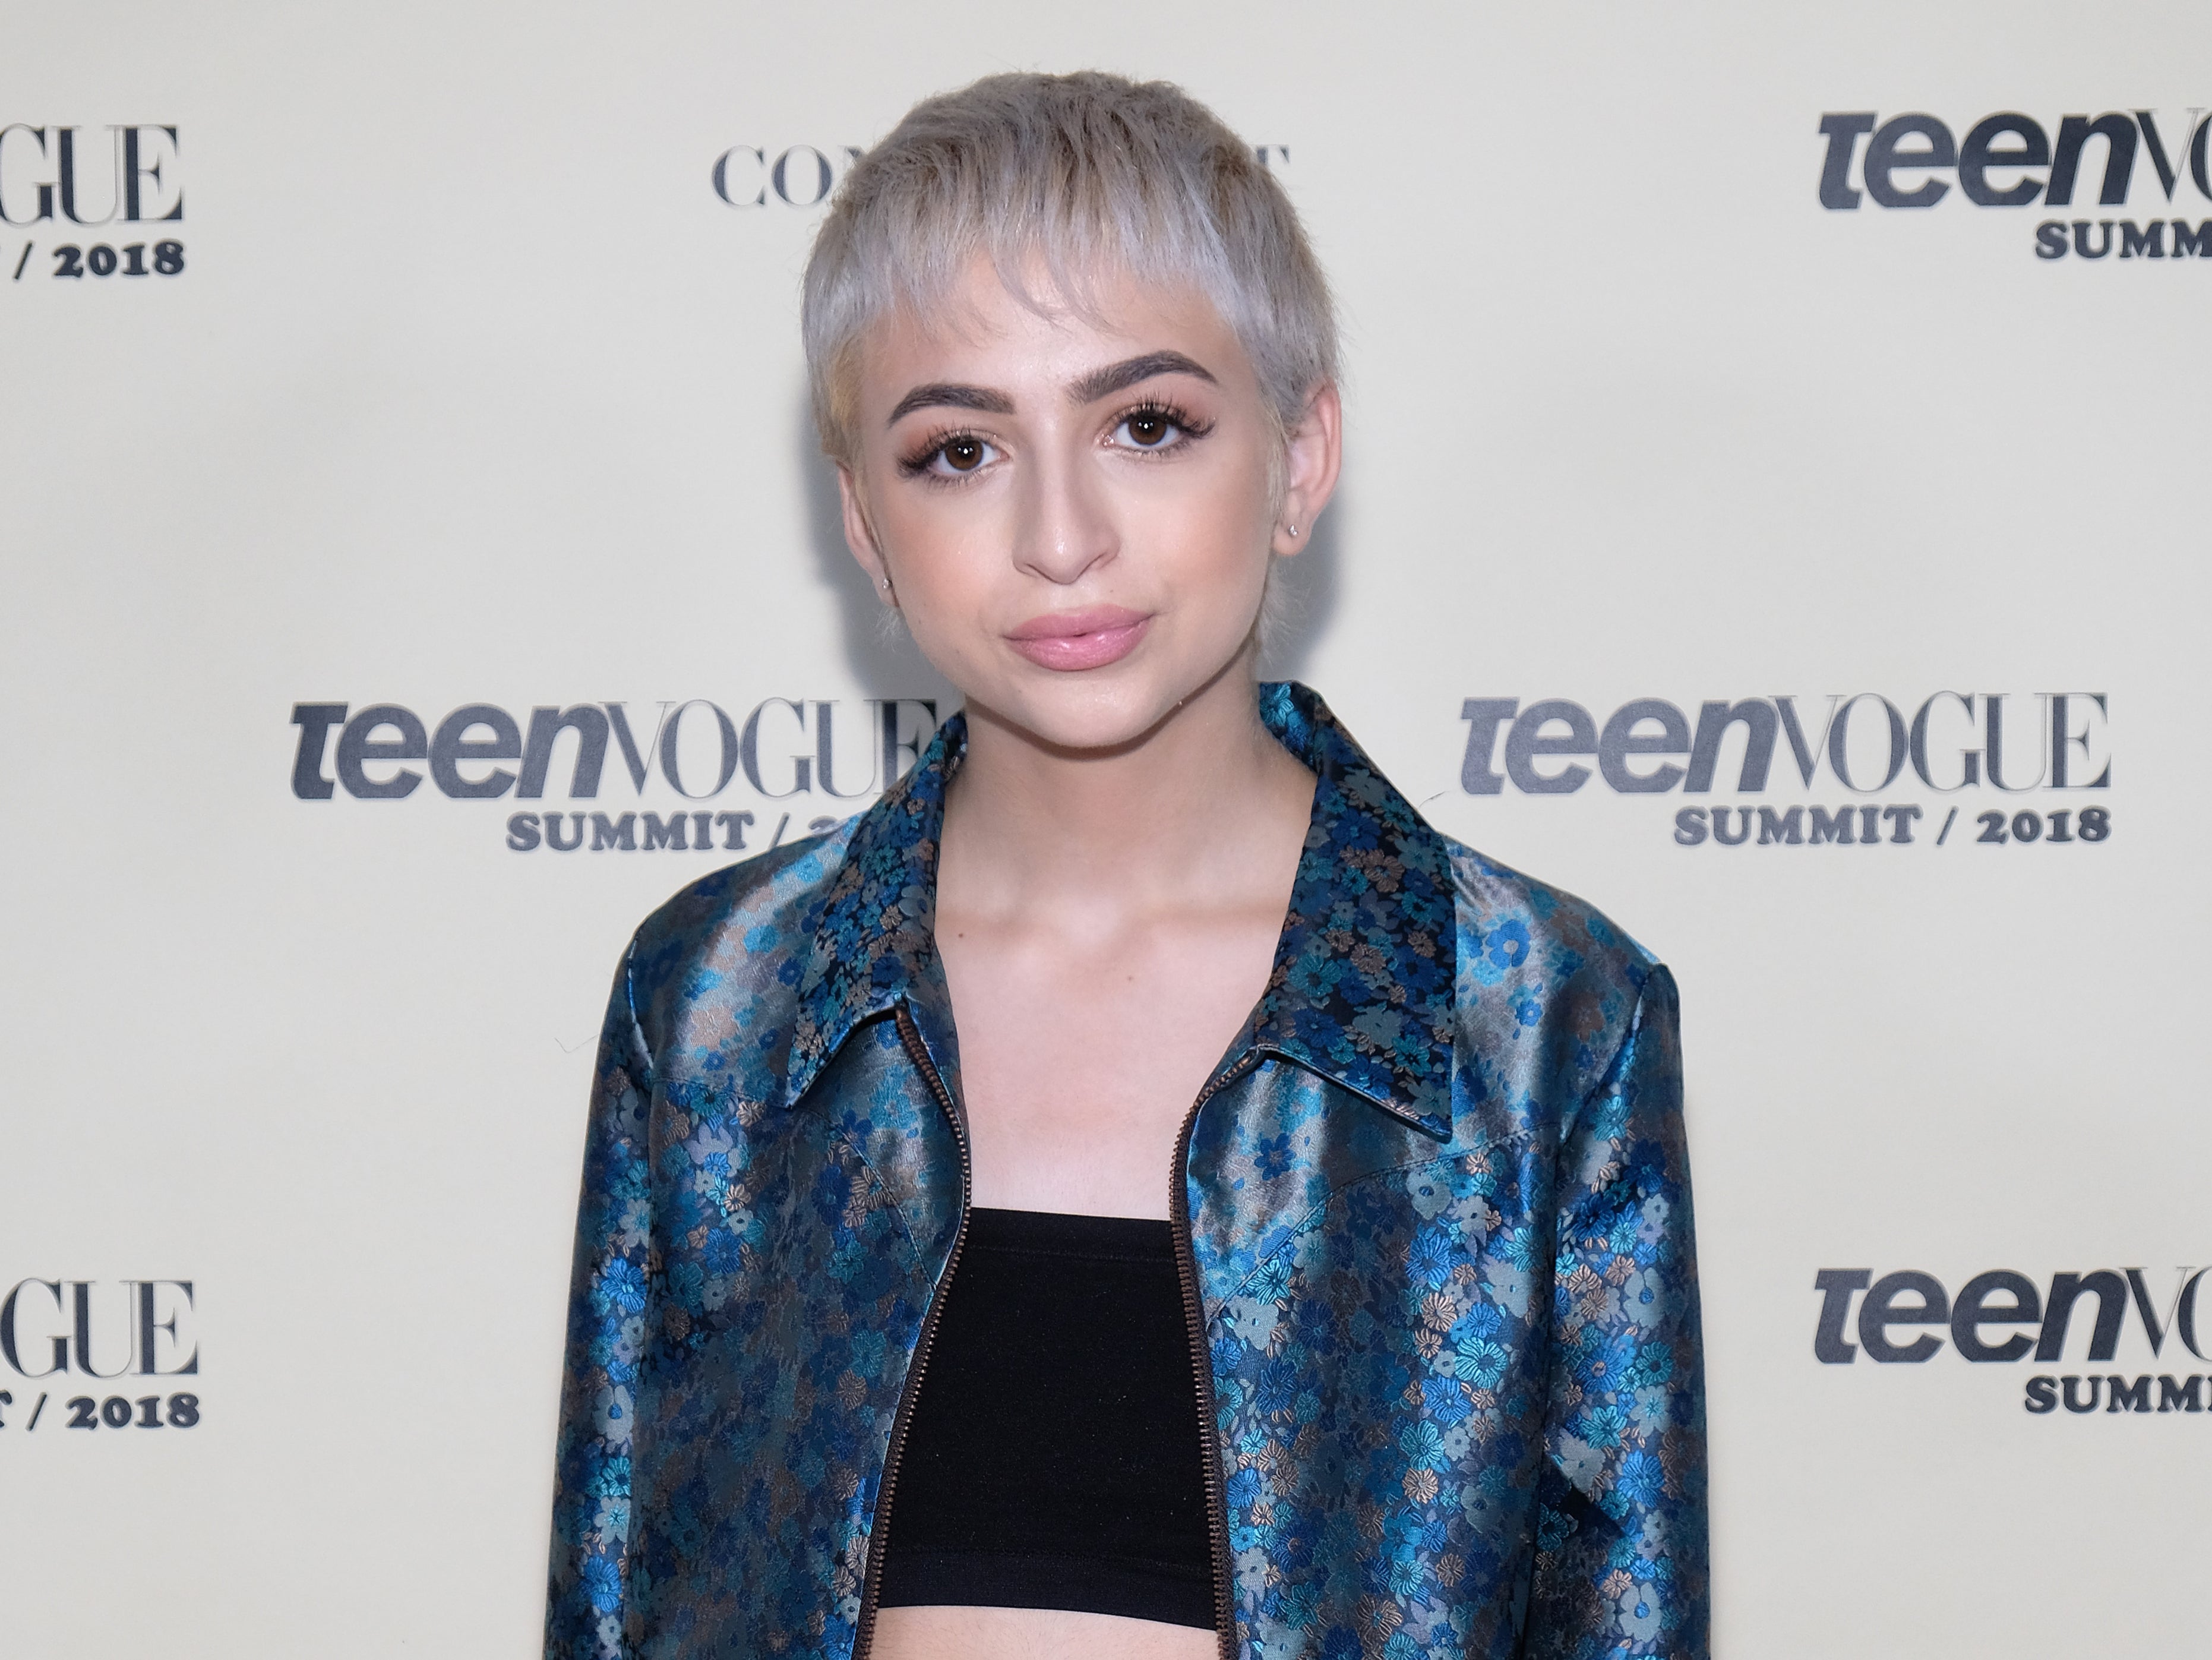 Totah has appeared on shows such as Big Mouth and the Saved by the Bell reboot